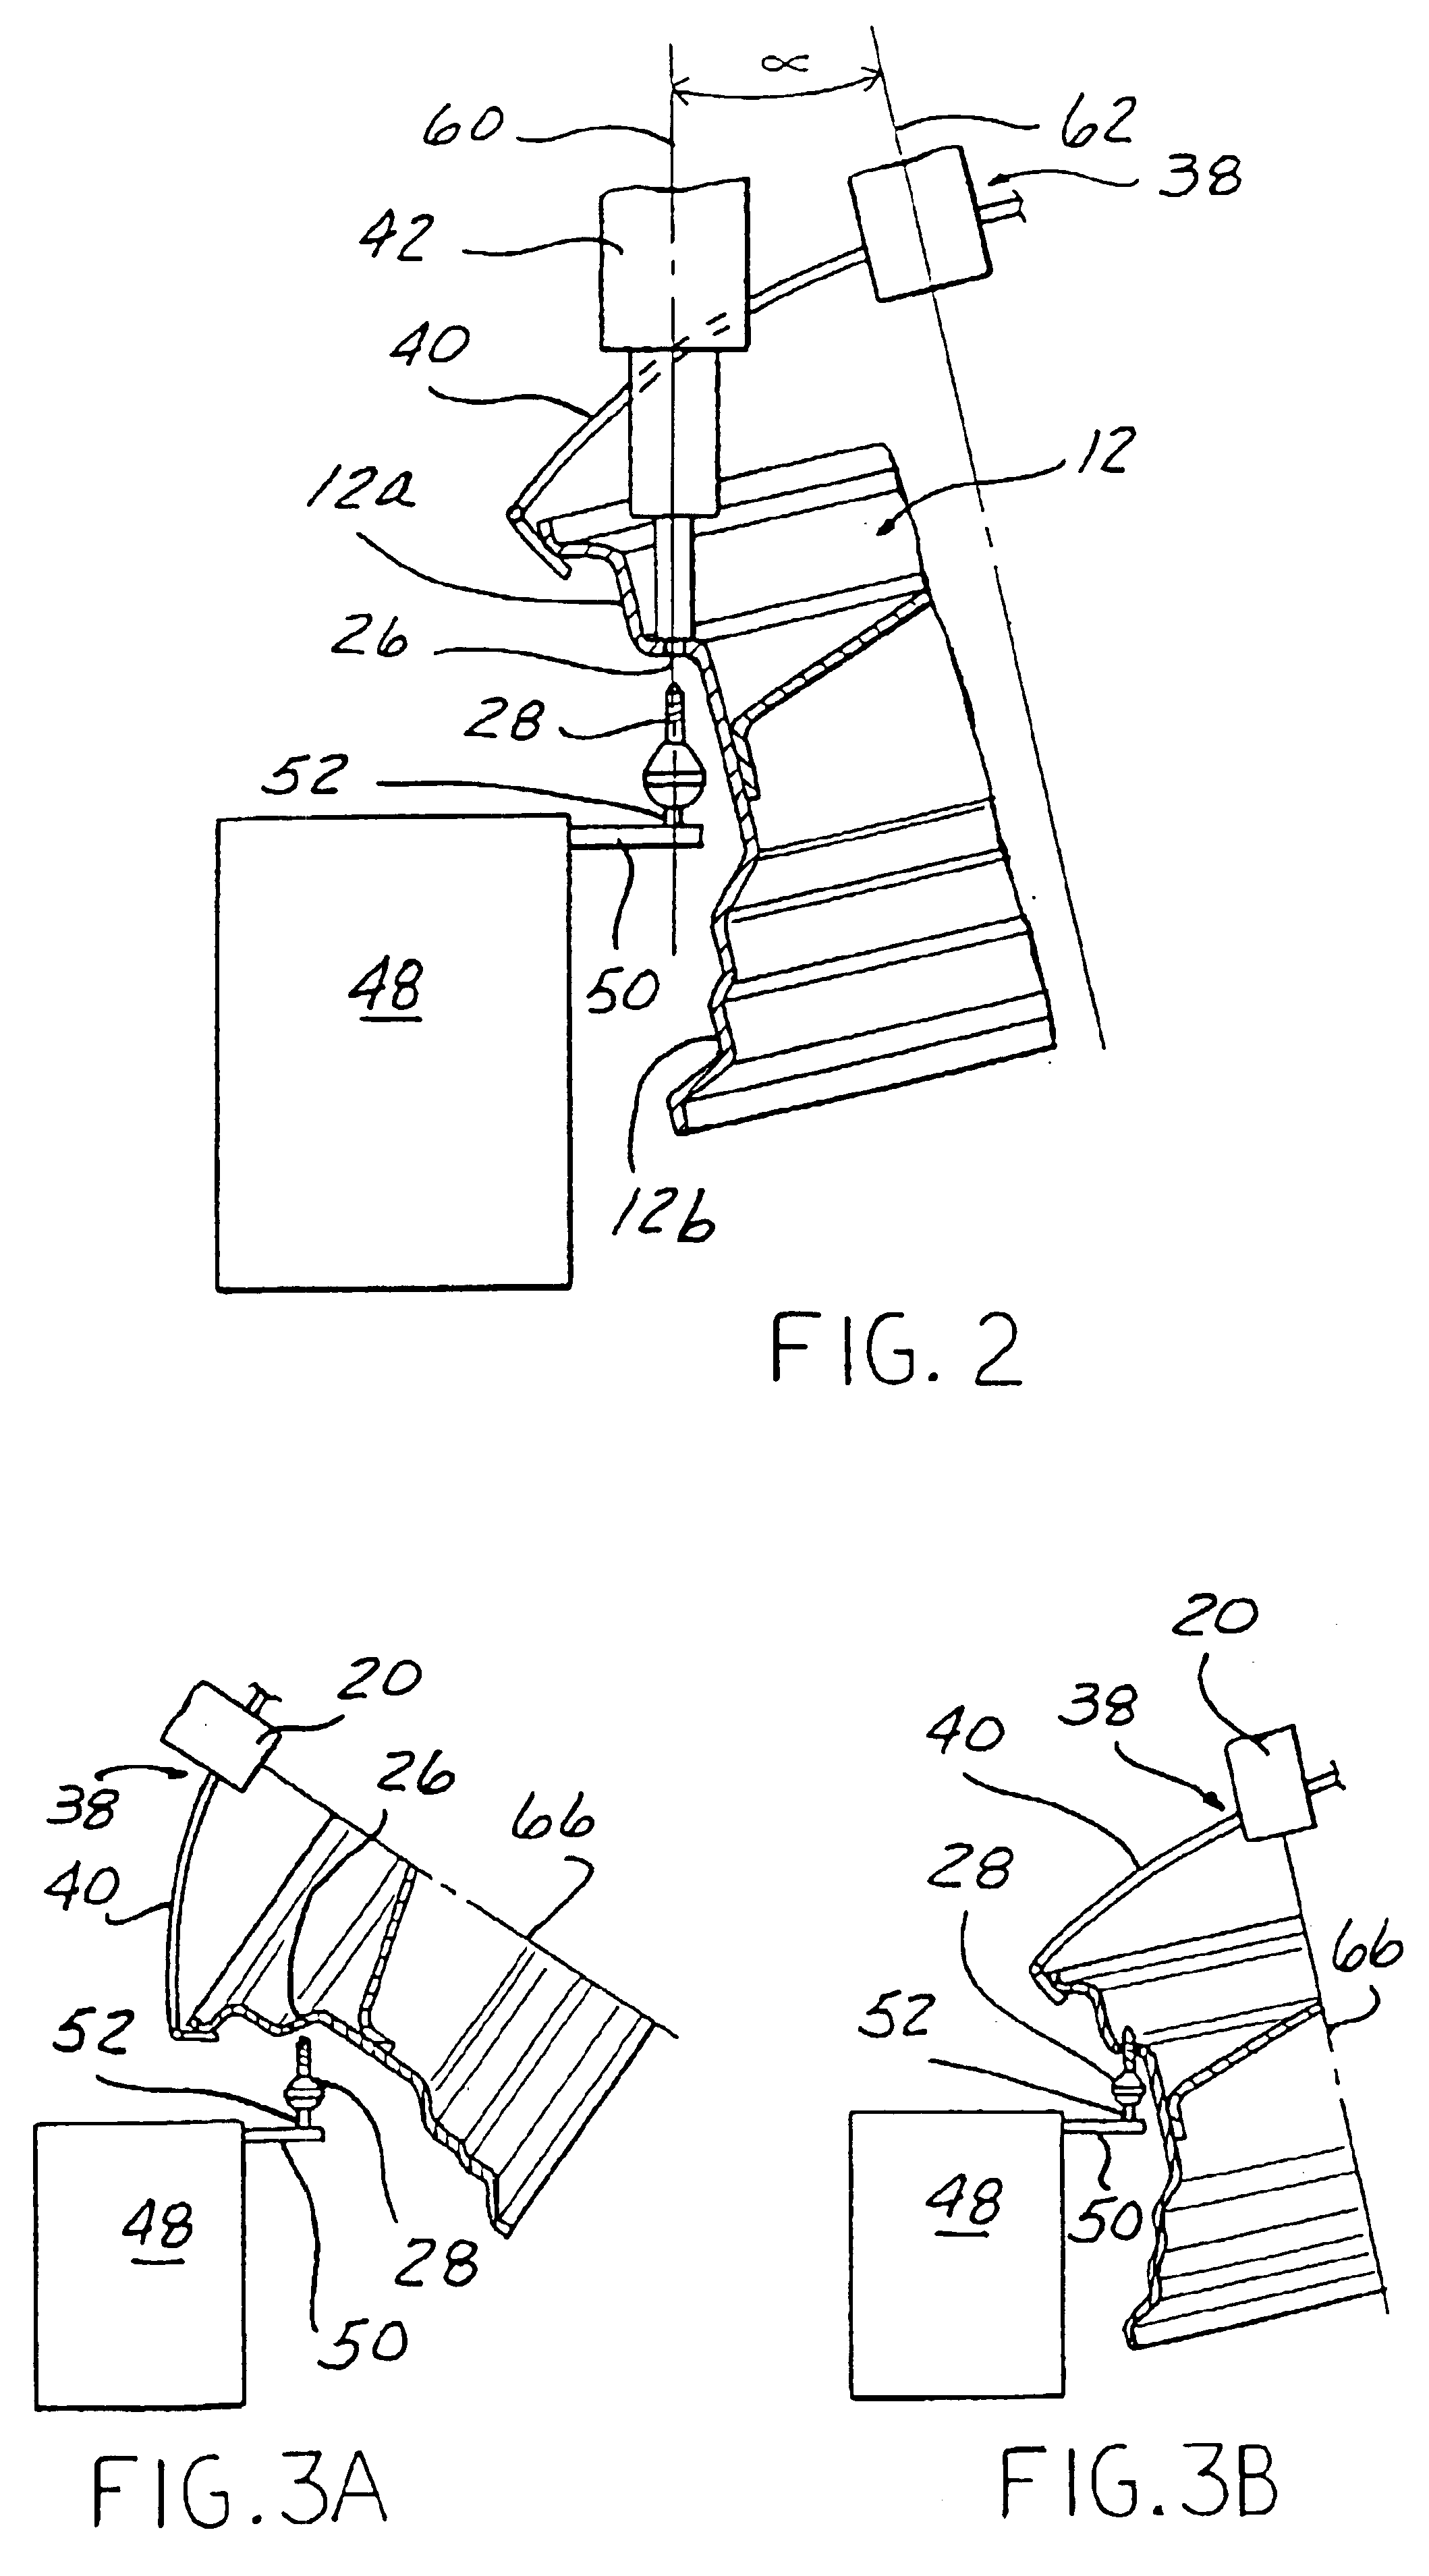 Robotic apparatus and method for mounting a valve stem on a wheel rim